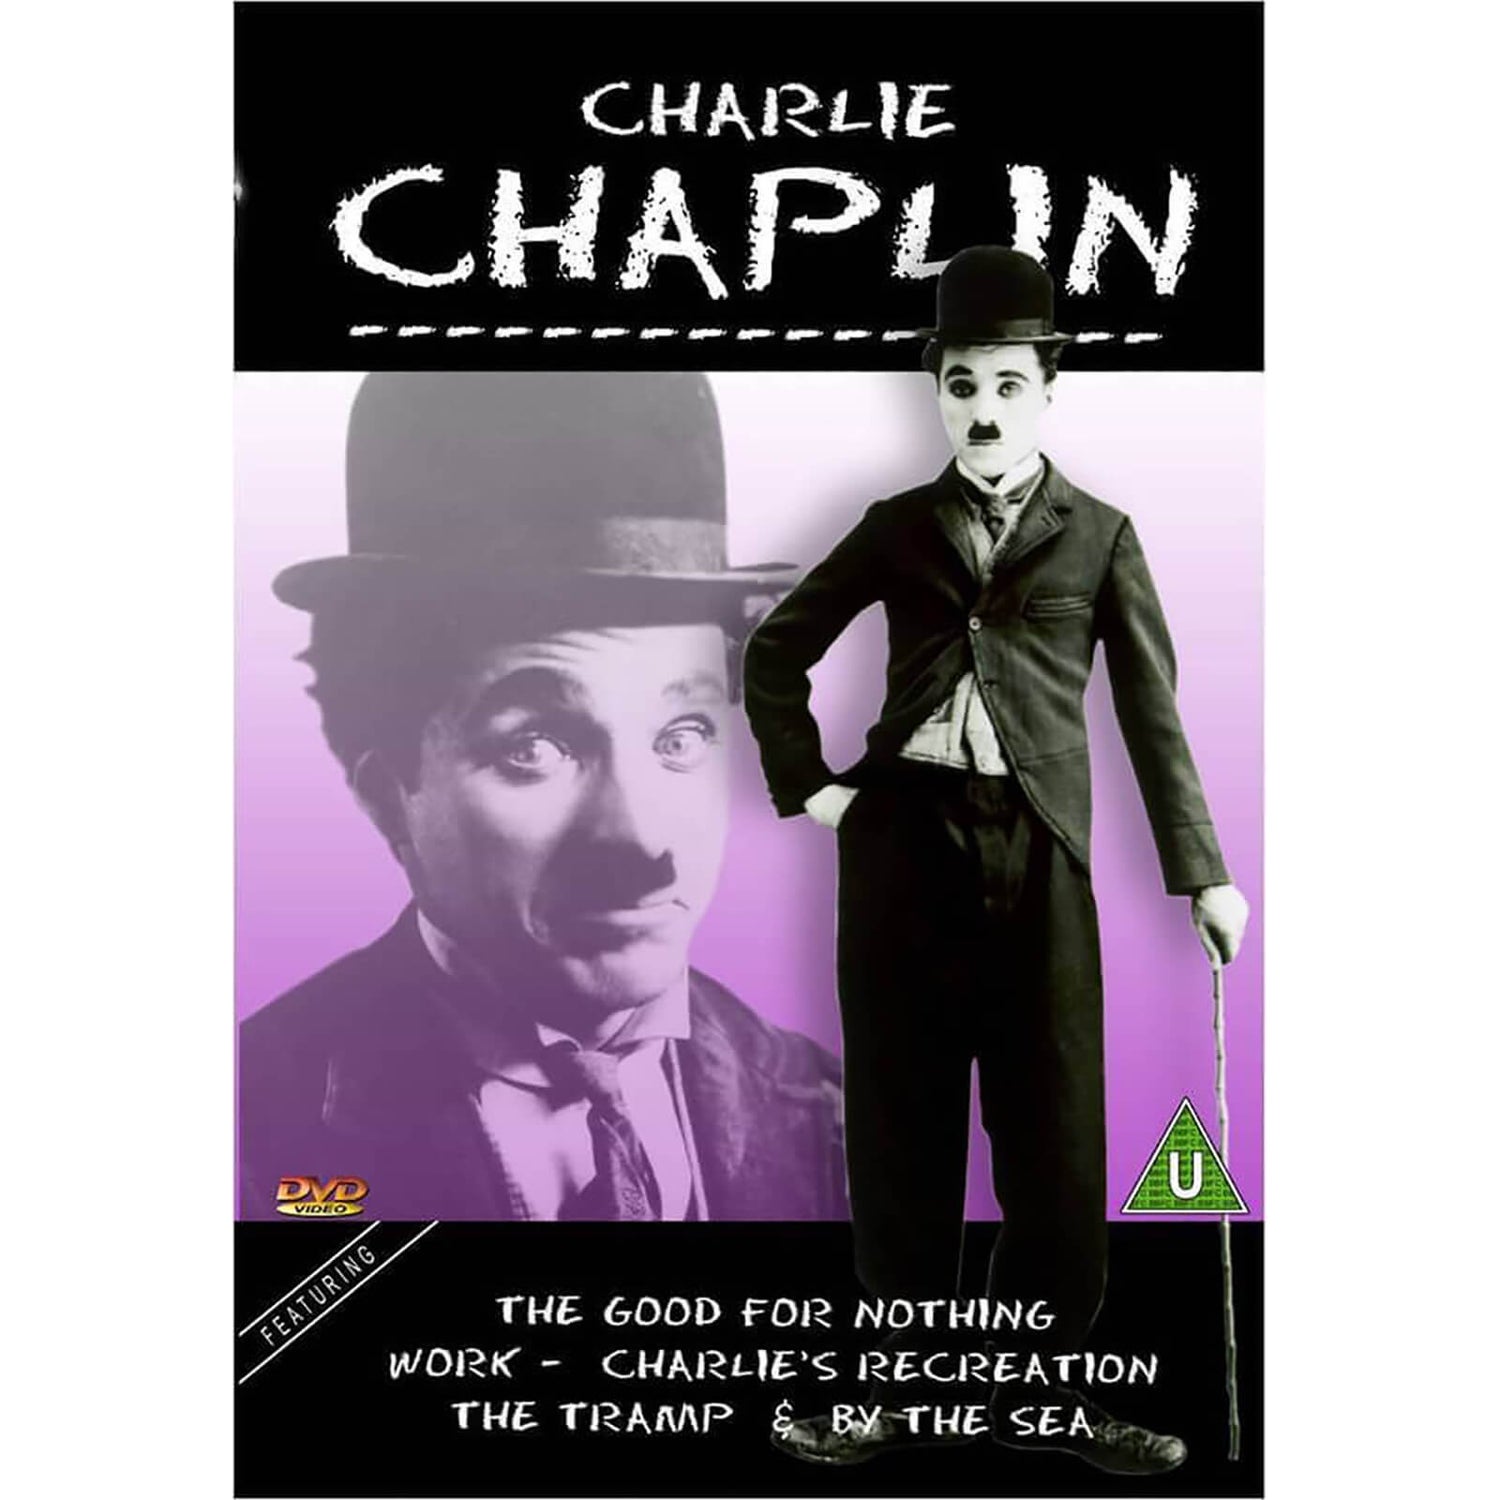 CHARLIE CHAPLIN COLLECTION 3